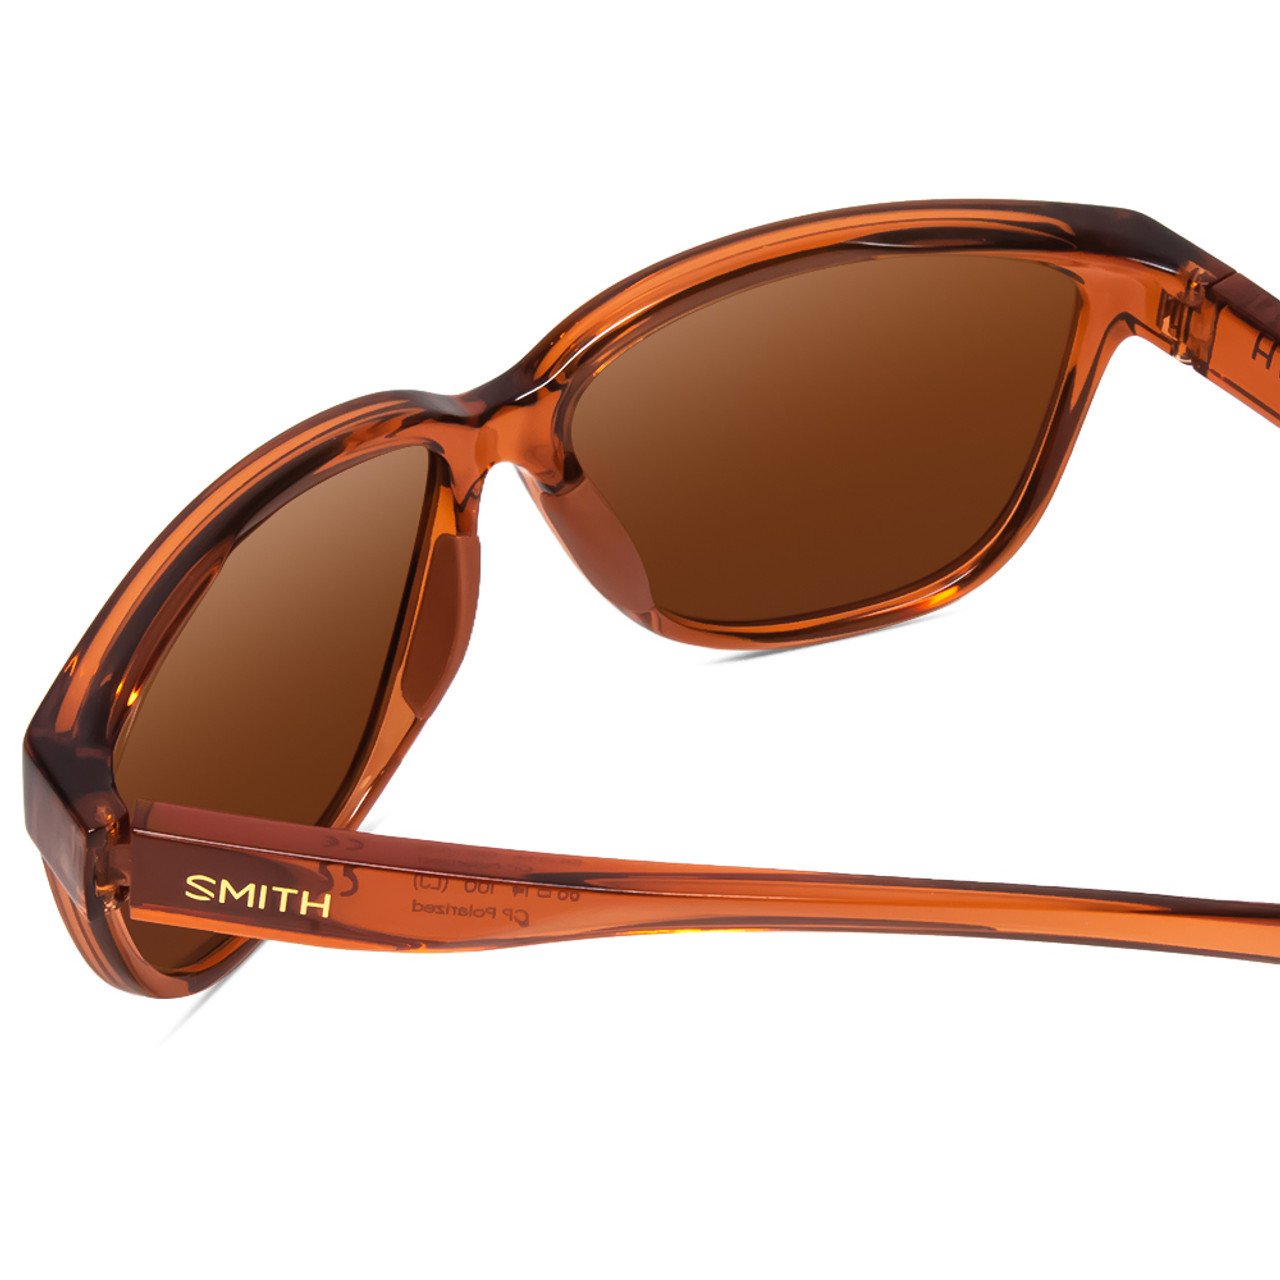 Close Up View of Smith Monterey Ladies Cateye Sunglasses Crystal Tobacco/CP Polarized Brown 58 mm